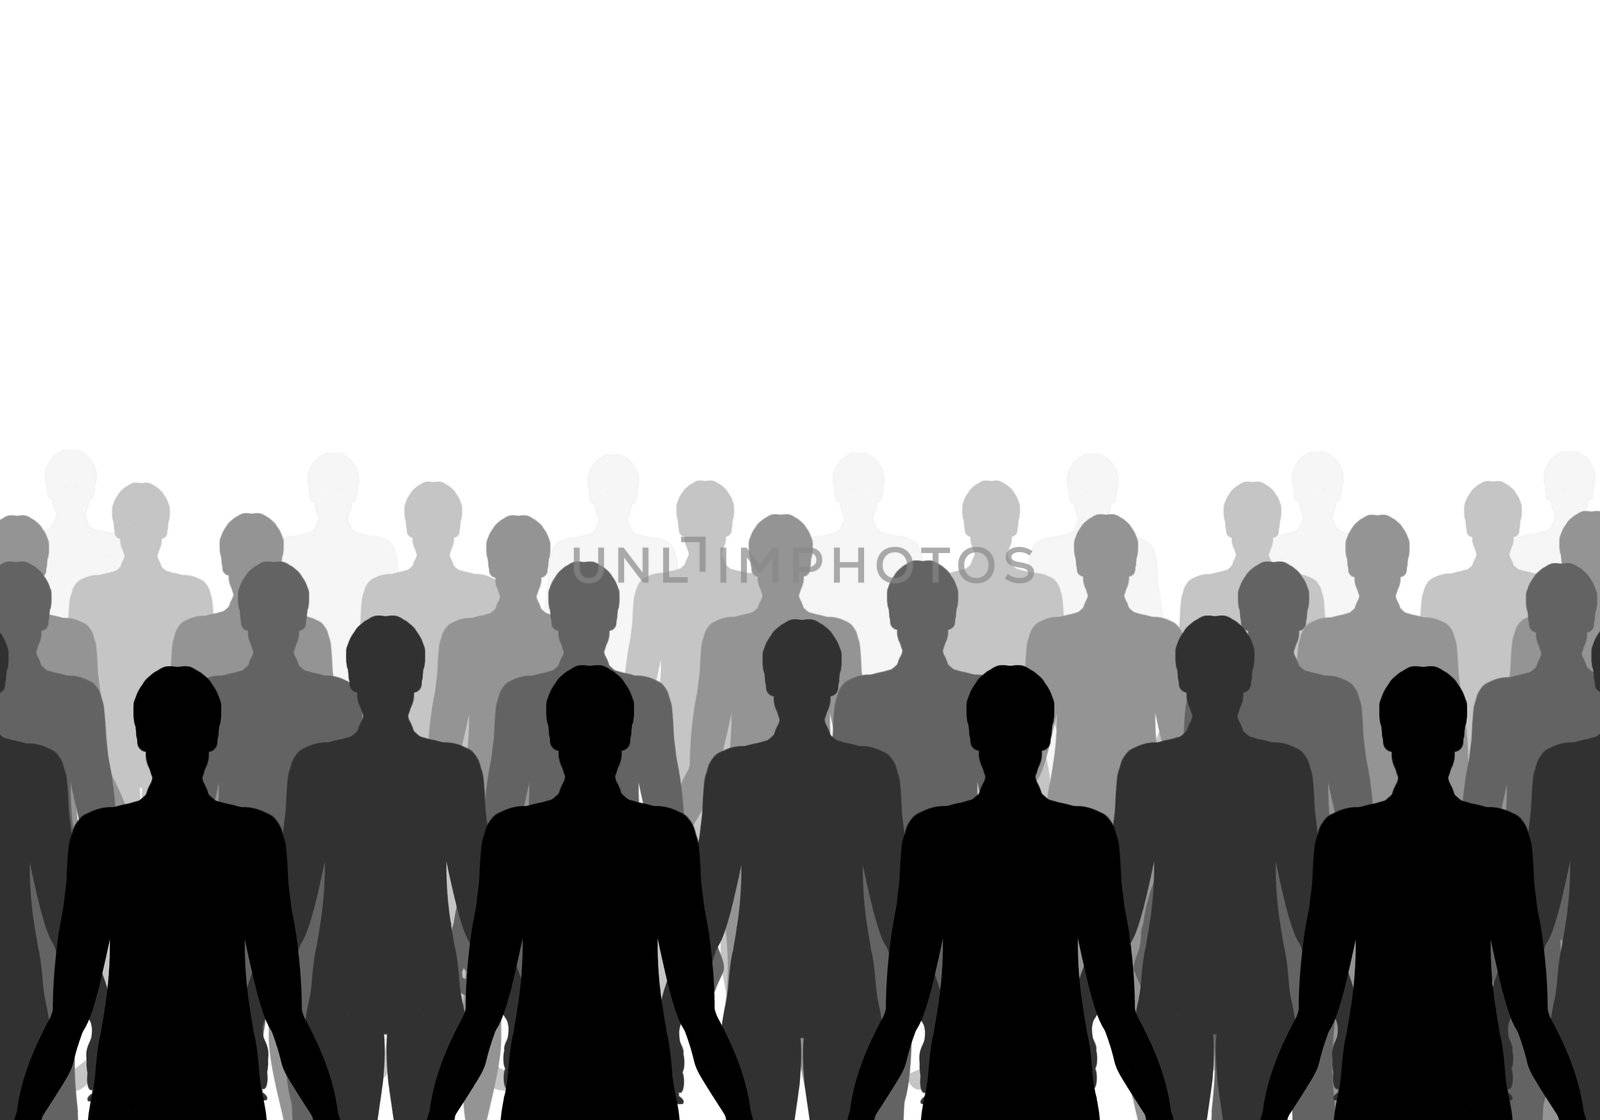 Illustration of lots of the same person in rows
